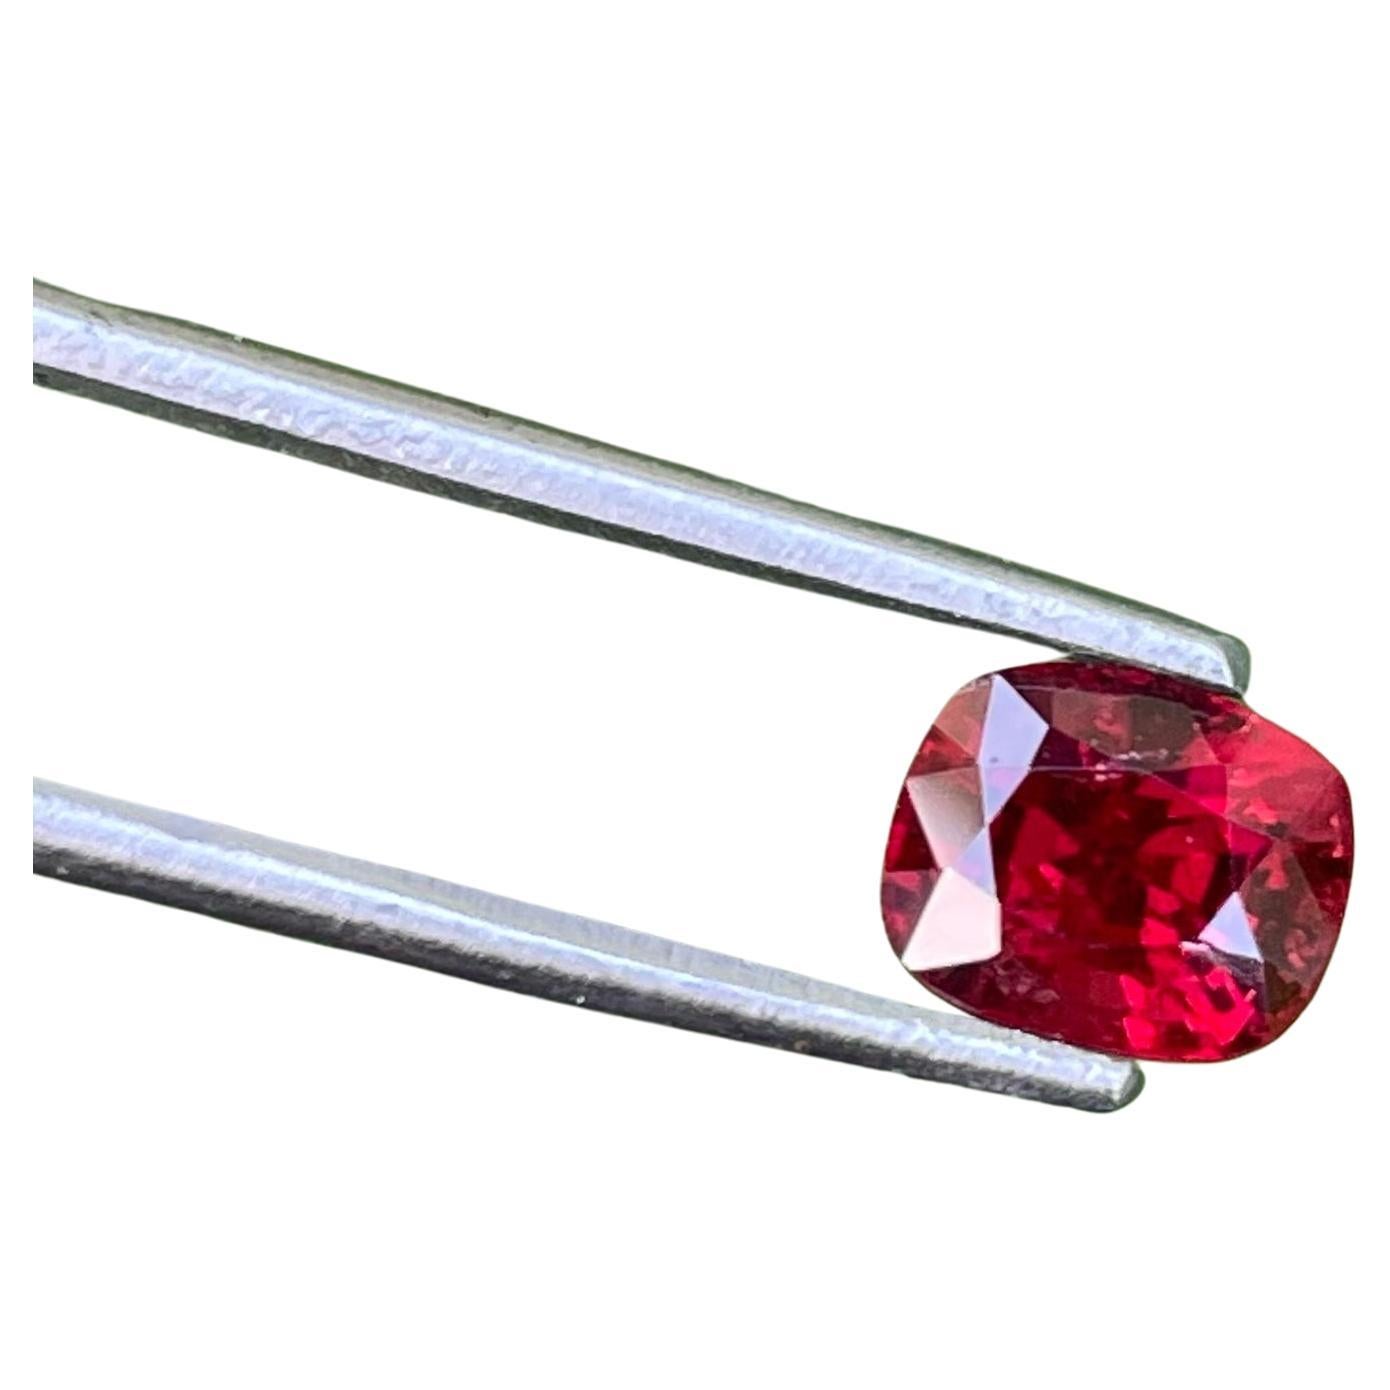 Shiny Red Spinel Stone 1.17 Carats